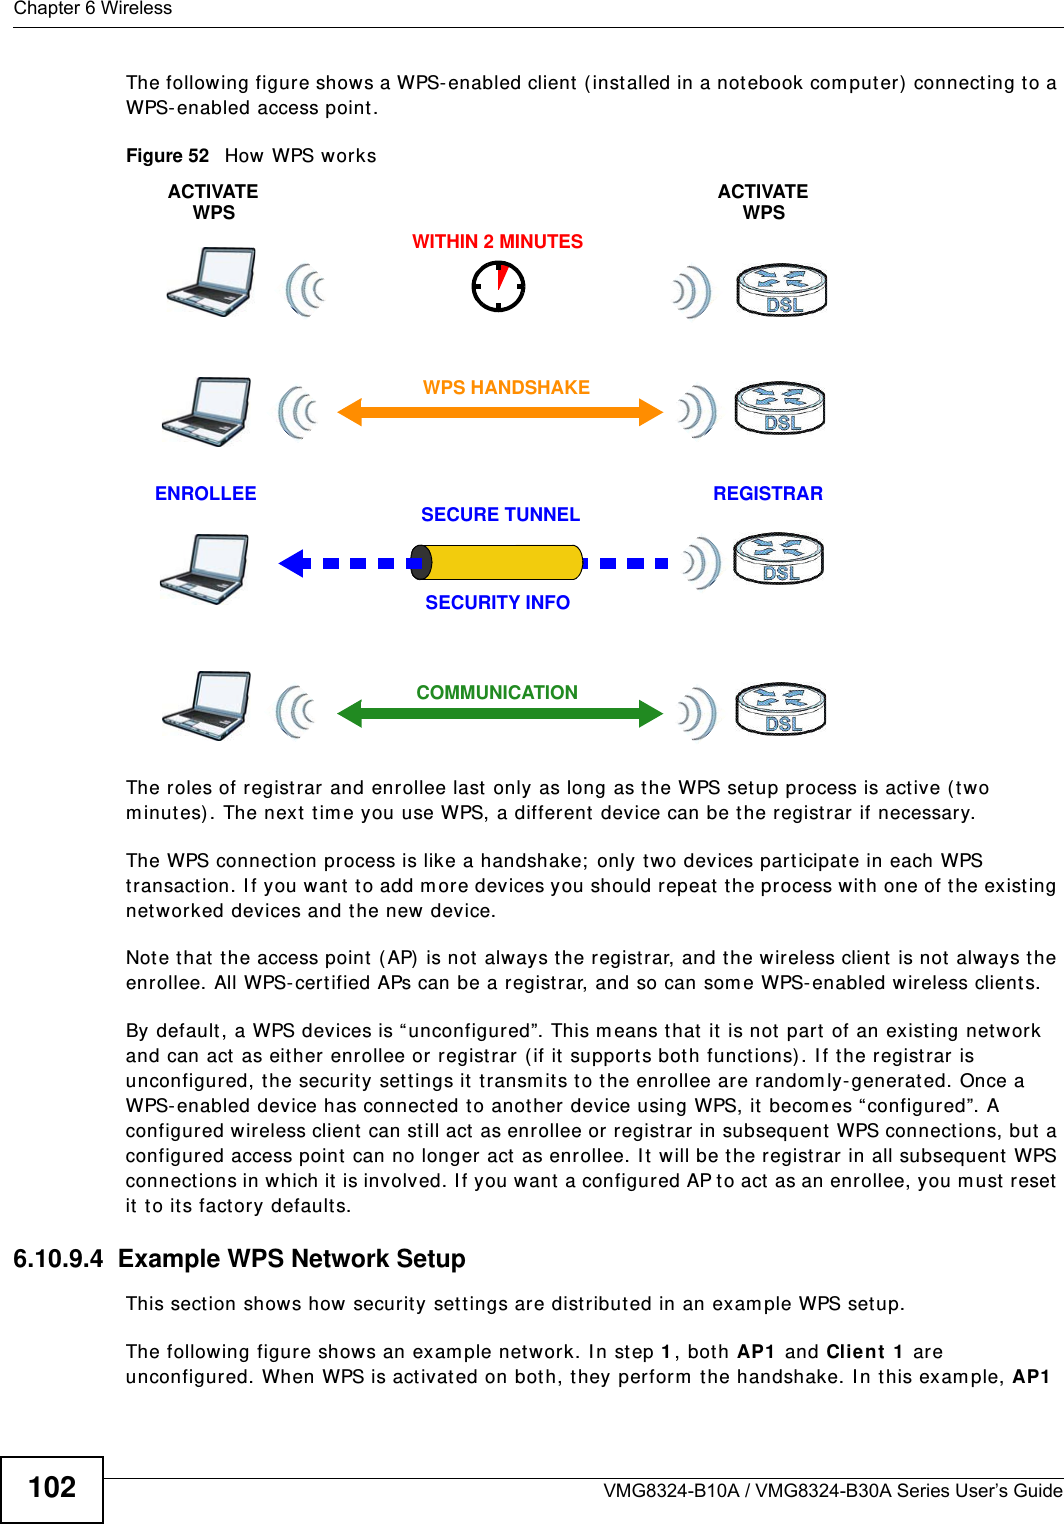 Chapter 6 WirelessVMG8324-B10A / VMG8324-B30A Series User’s Guide102The following figure shows a WPS- enabled client  ( installed in a notebook com put er)  connect ing t o a WPS- enabled access point .Figure 52   How WPS worksThe roles of regist rar and enrollee last  only as long as t he WPS set up pr ocess is act ive (t wo m inutes) . The next  t im e you use WPS, a different device can be t he regist rar if necessary.The WPS connect ion process is like a handshake;  only t wo devices part icipate in each WPS transact ion. I f you want  t o add m ore devices you should repeat t he process wit h one of t he exist ing net worked devices and t he new device.Not e that t he access point ( AP) is not  always t he regist rar, and t he wireless client  is not always t he enrollee. All WPS- cert ified APs can be a regist rar, and so can som e WPS- enabled wireless client s.By default, a WPS devices is “ unconfigured”. This m eans t hat  it is not  part  of an exist ing net work and can act as eit her enrollee or regist rar ( if it support s bot h funct ions) . I f t he registrar is unconfigured, t he security set t ings it  t ransm its to the enrollee are random ly- generated. Once a WPS- enabled device has connected t o another  device using WPS, it becom es “ configured”. A configured wireless client  can st ill act  as enrollee or regist rar in subsequent WPS connections, but a configured access point  can no longer act  as enrollee. I t  will be t he regist rar in all subsequent  WPS connect ions in which it  is involved. I f you want a configur ed AP to act as an enrollee, you m ust  reset it  t o it s factory default s.6.10.9.4  Example WPS Network SetupThis sect ion shows how security set t ings are dist ributed in an exam ple WPS set up.The following figure shows an exam ple net work. I n step 1, bot h AP1  and Clie n t  1  are unconfigured. When WPS is activat ed on both, they perform  t he handshake. I n t his exam ple, AP1  SECURE TUNNELSECURITY INFOWITHIN 2 MINUTESCOMMUNICATIONACTIVATEWPSACTIVATEWPSWPS HANDSHAKEREGISTRARENROLLEE